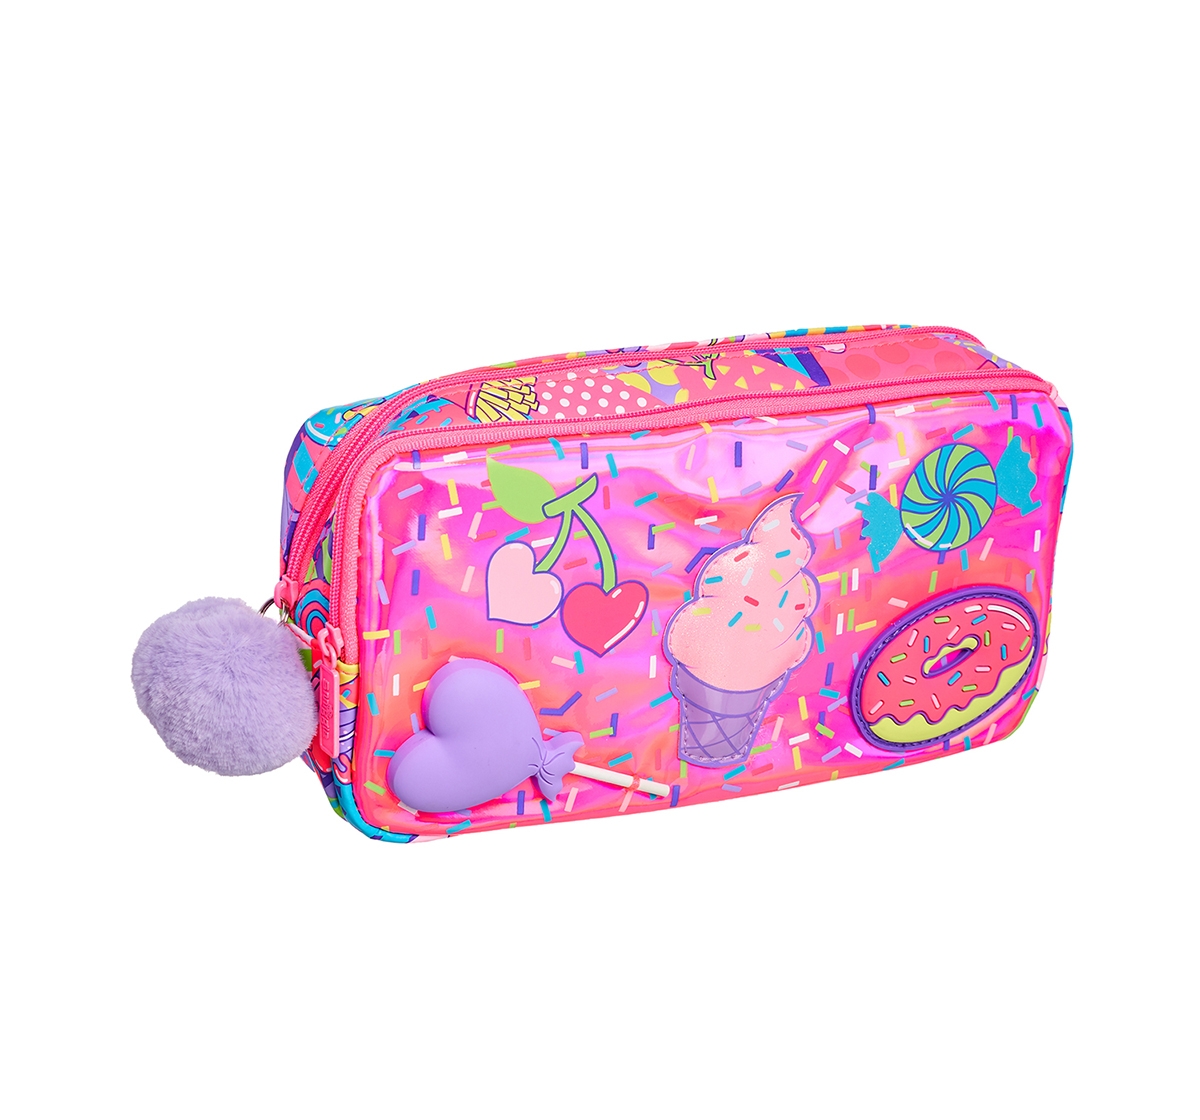 Smiggle | Smiggle Far Away Character Pencil Case - Ice-cream Print Bags for Kids age 3Y+ (Pink) 1